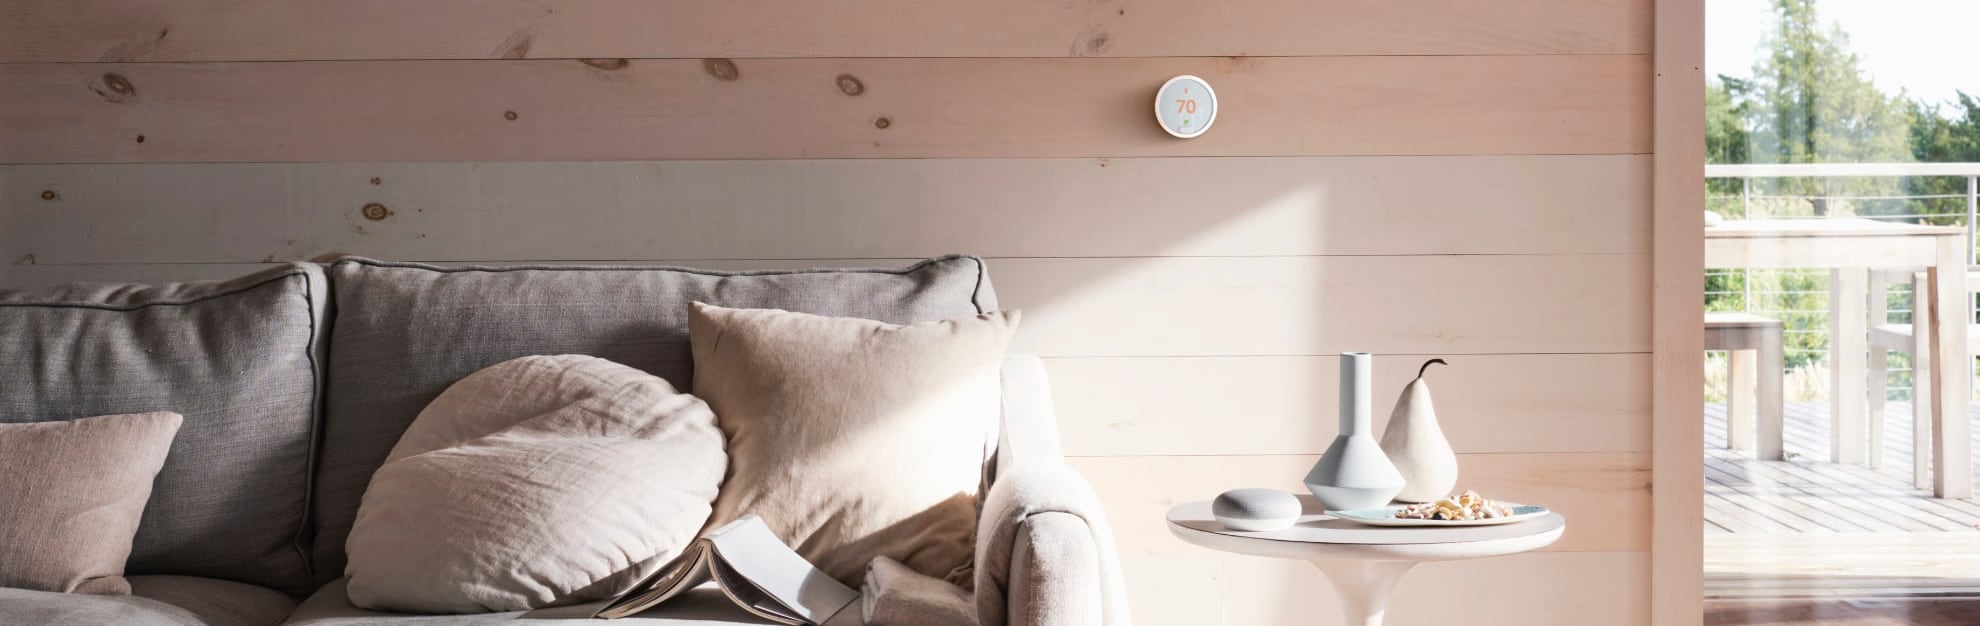 Vivint Home Automation in Fargo